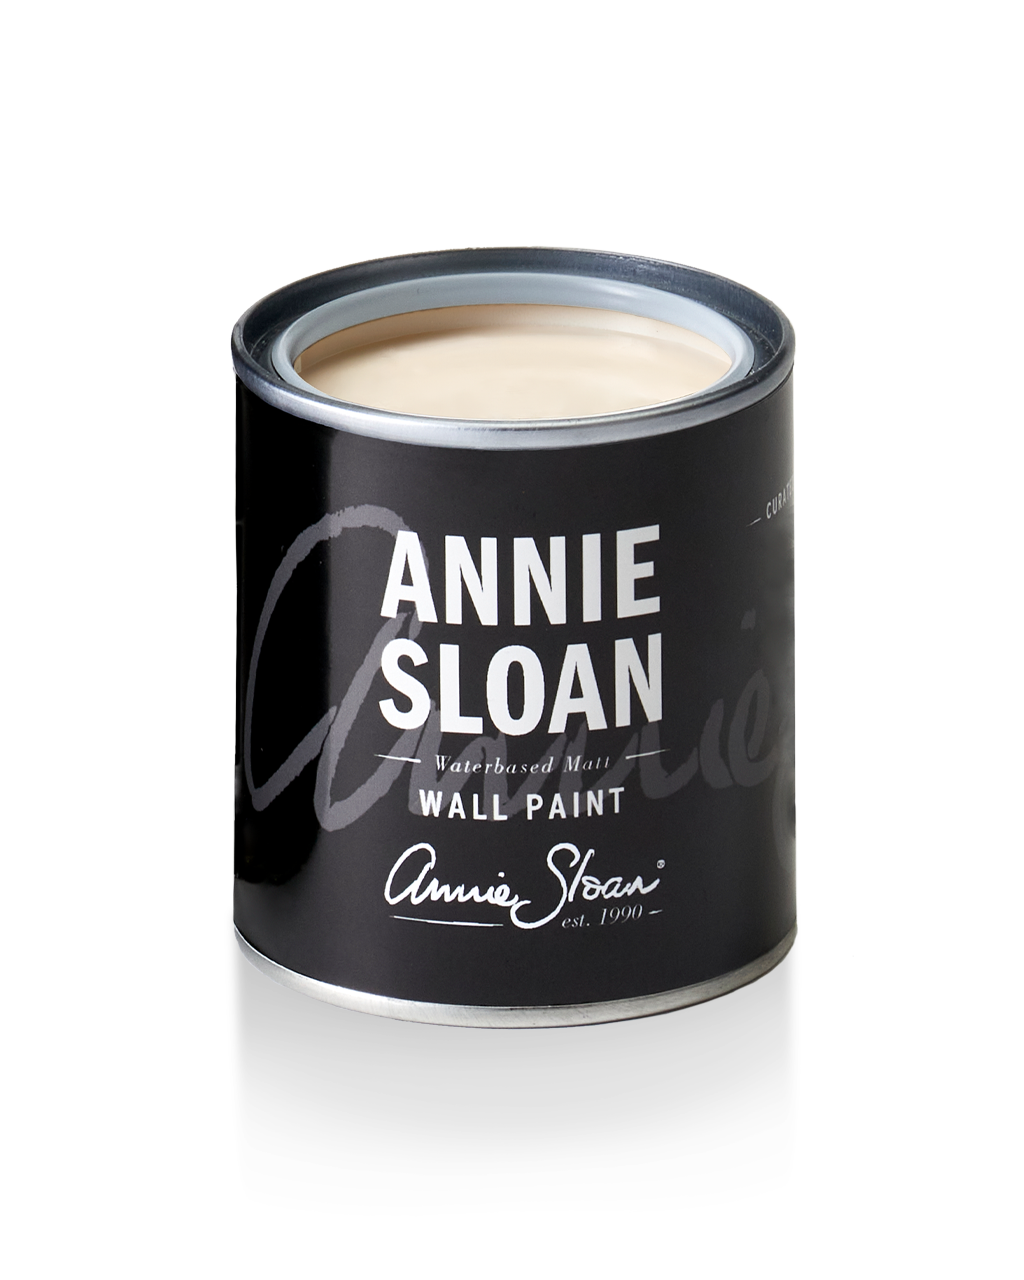 120ml of Original wall paint by Annie Sloan